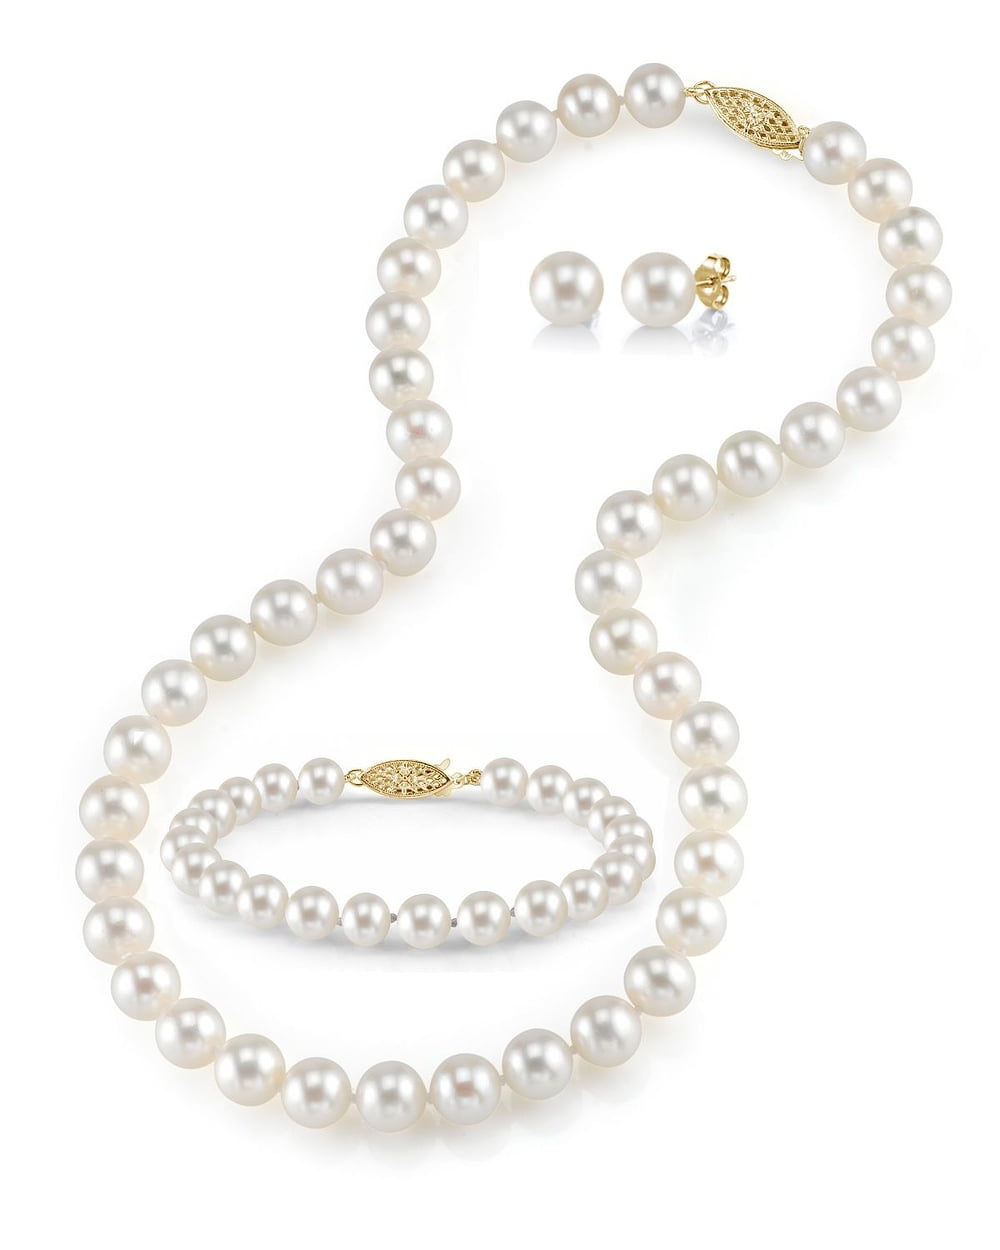 6-7mm 14k Gold AAA Quality High Luster White Freshwater Cultured Pearl Necklace